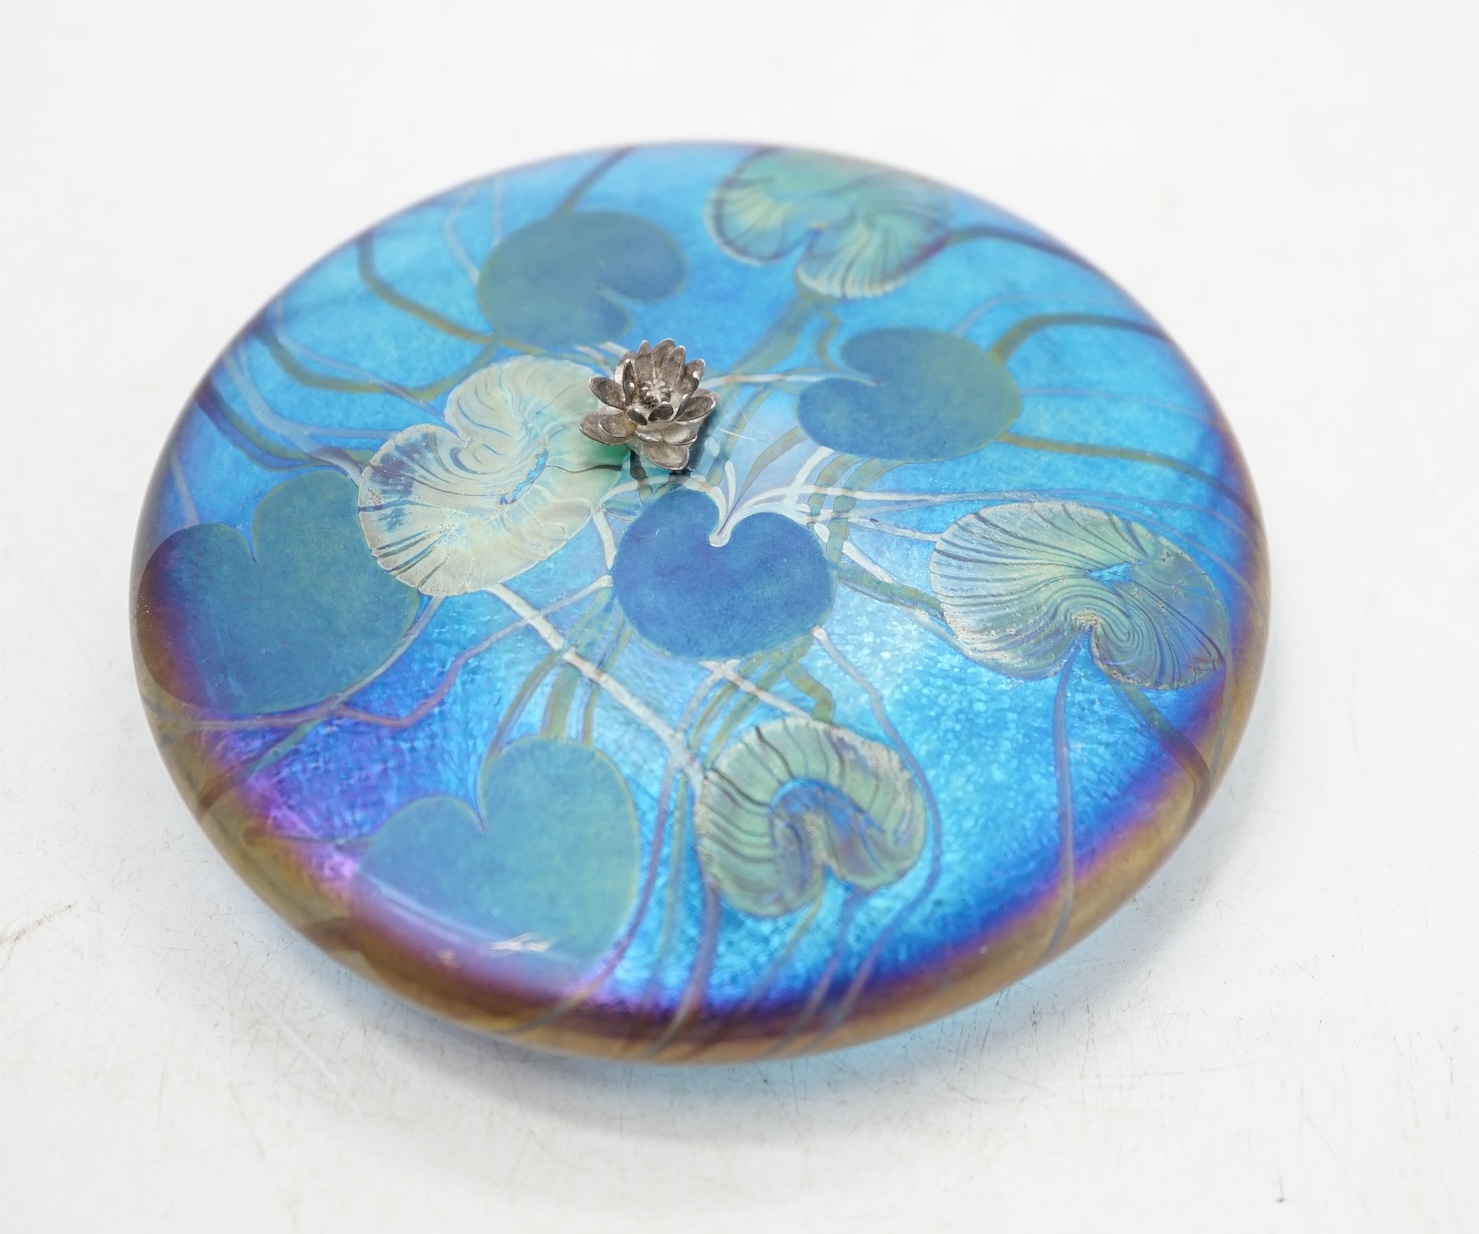 A John Ditchfield for Glasform paperweight, disc shaped with lily pad decoration and metal frog mounted in the centre,11cm diameter. Condition - frog needs re-gluing, glass paperweight good